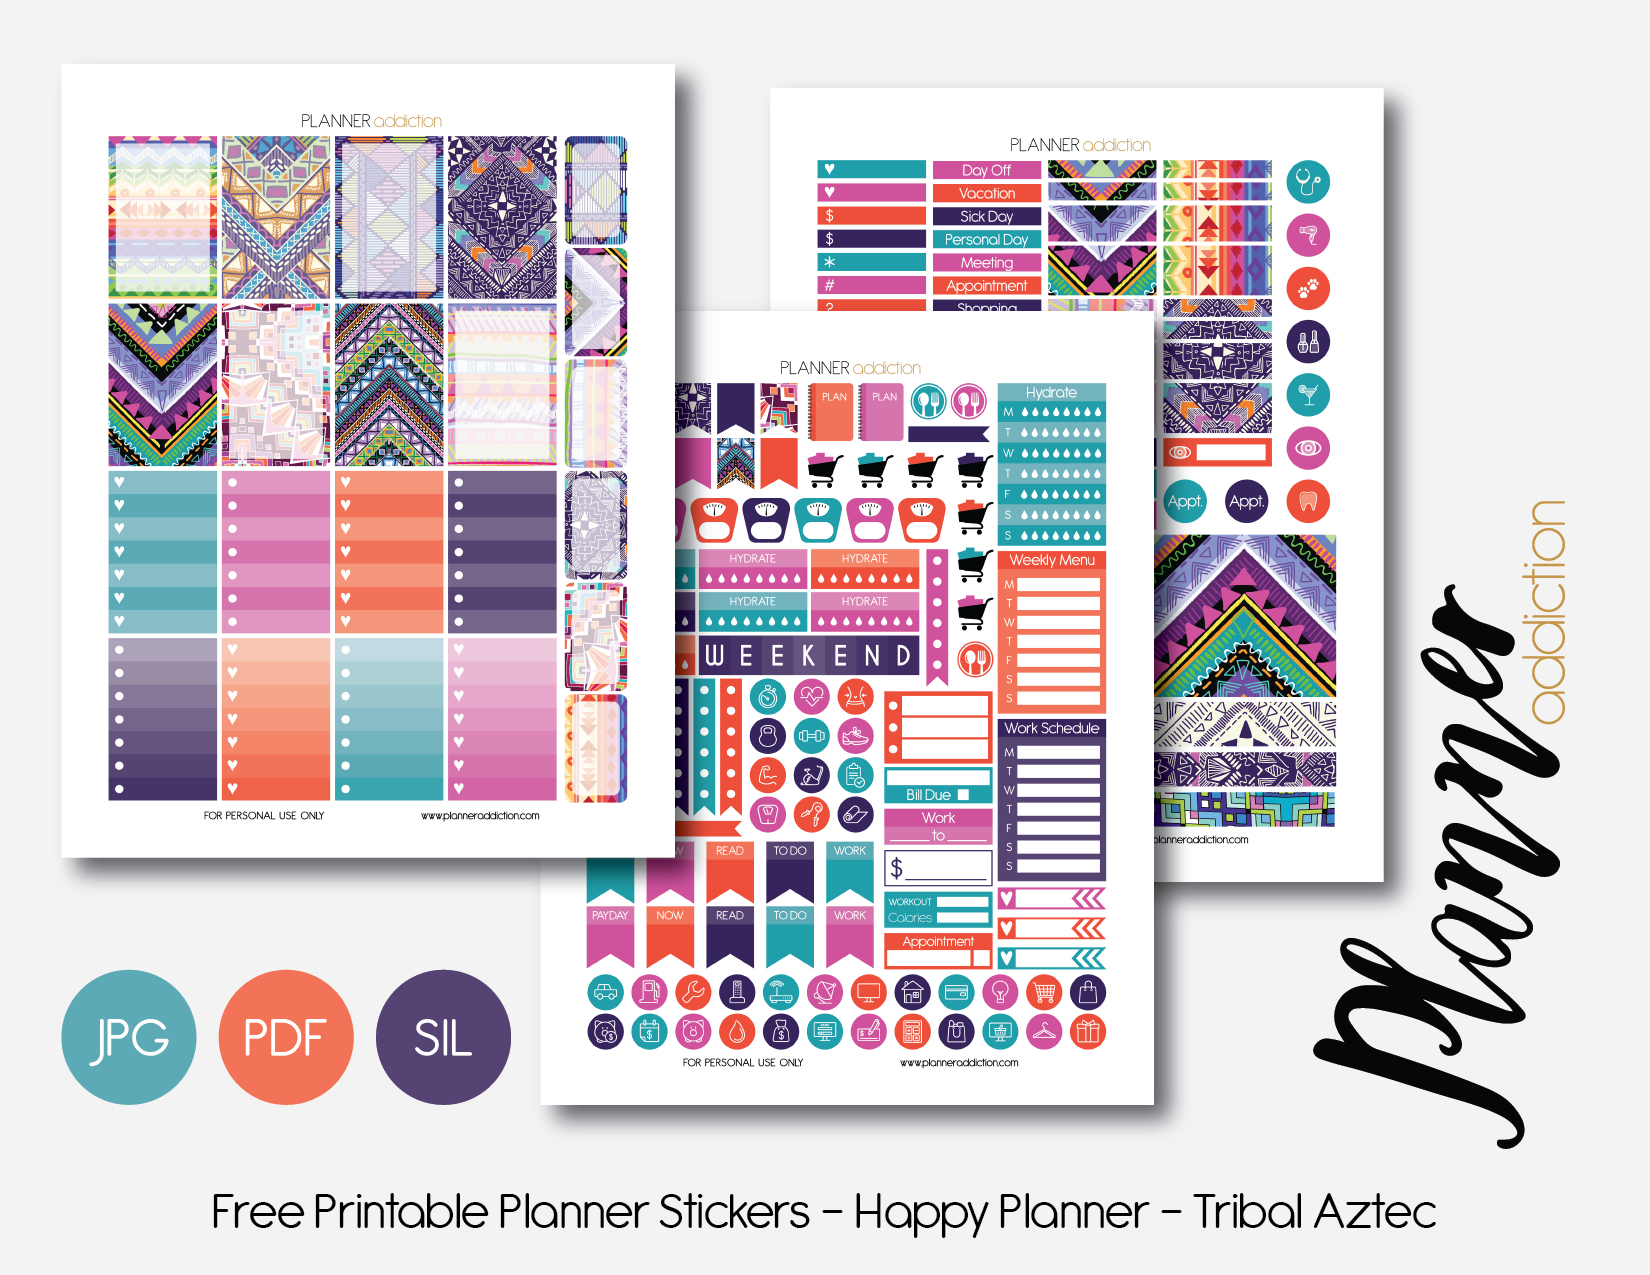 Free Printable Planner Stickers – Planner Addiction - Happy Planner Free Printable Stickers